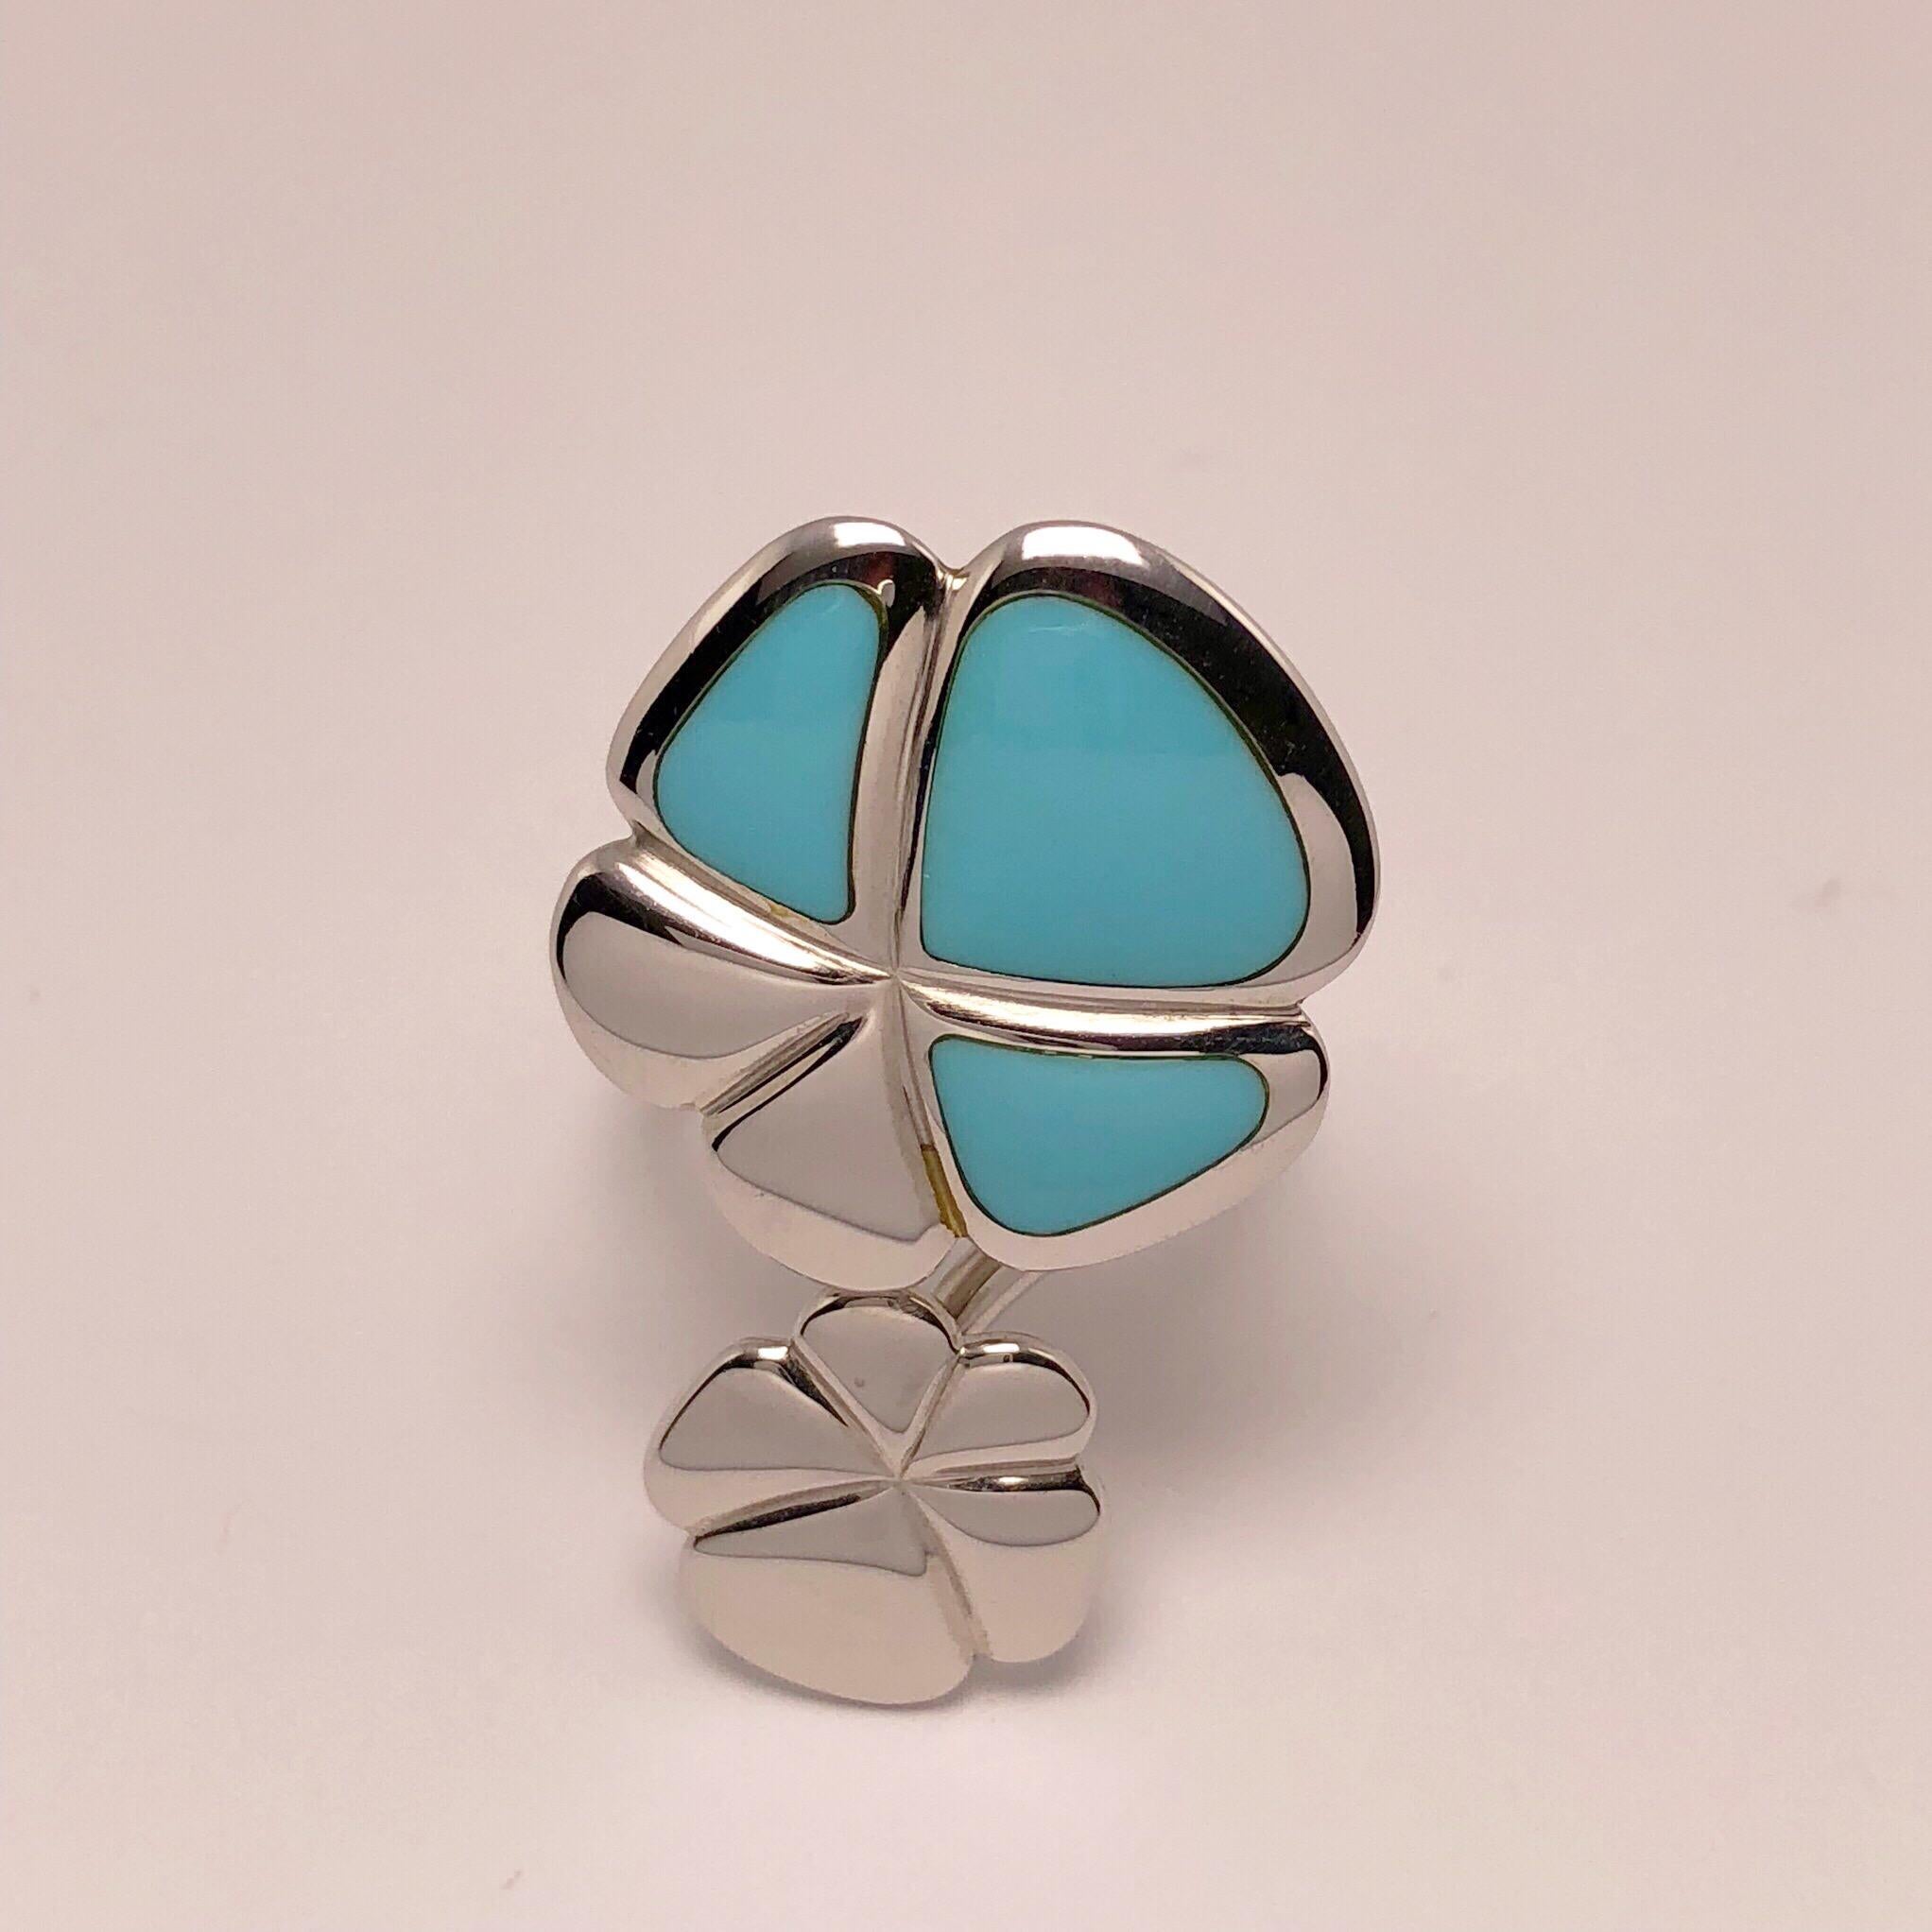 Contemporary Ambrosi Cellini Exclusive 18 Karat White Gold and Turquoise Clover Ring For Sale